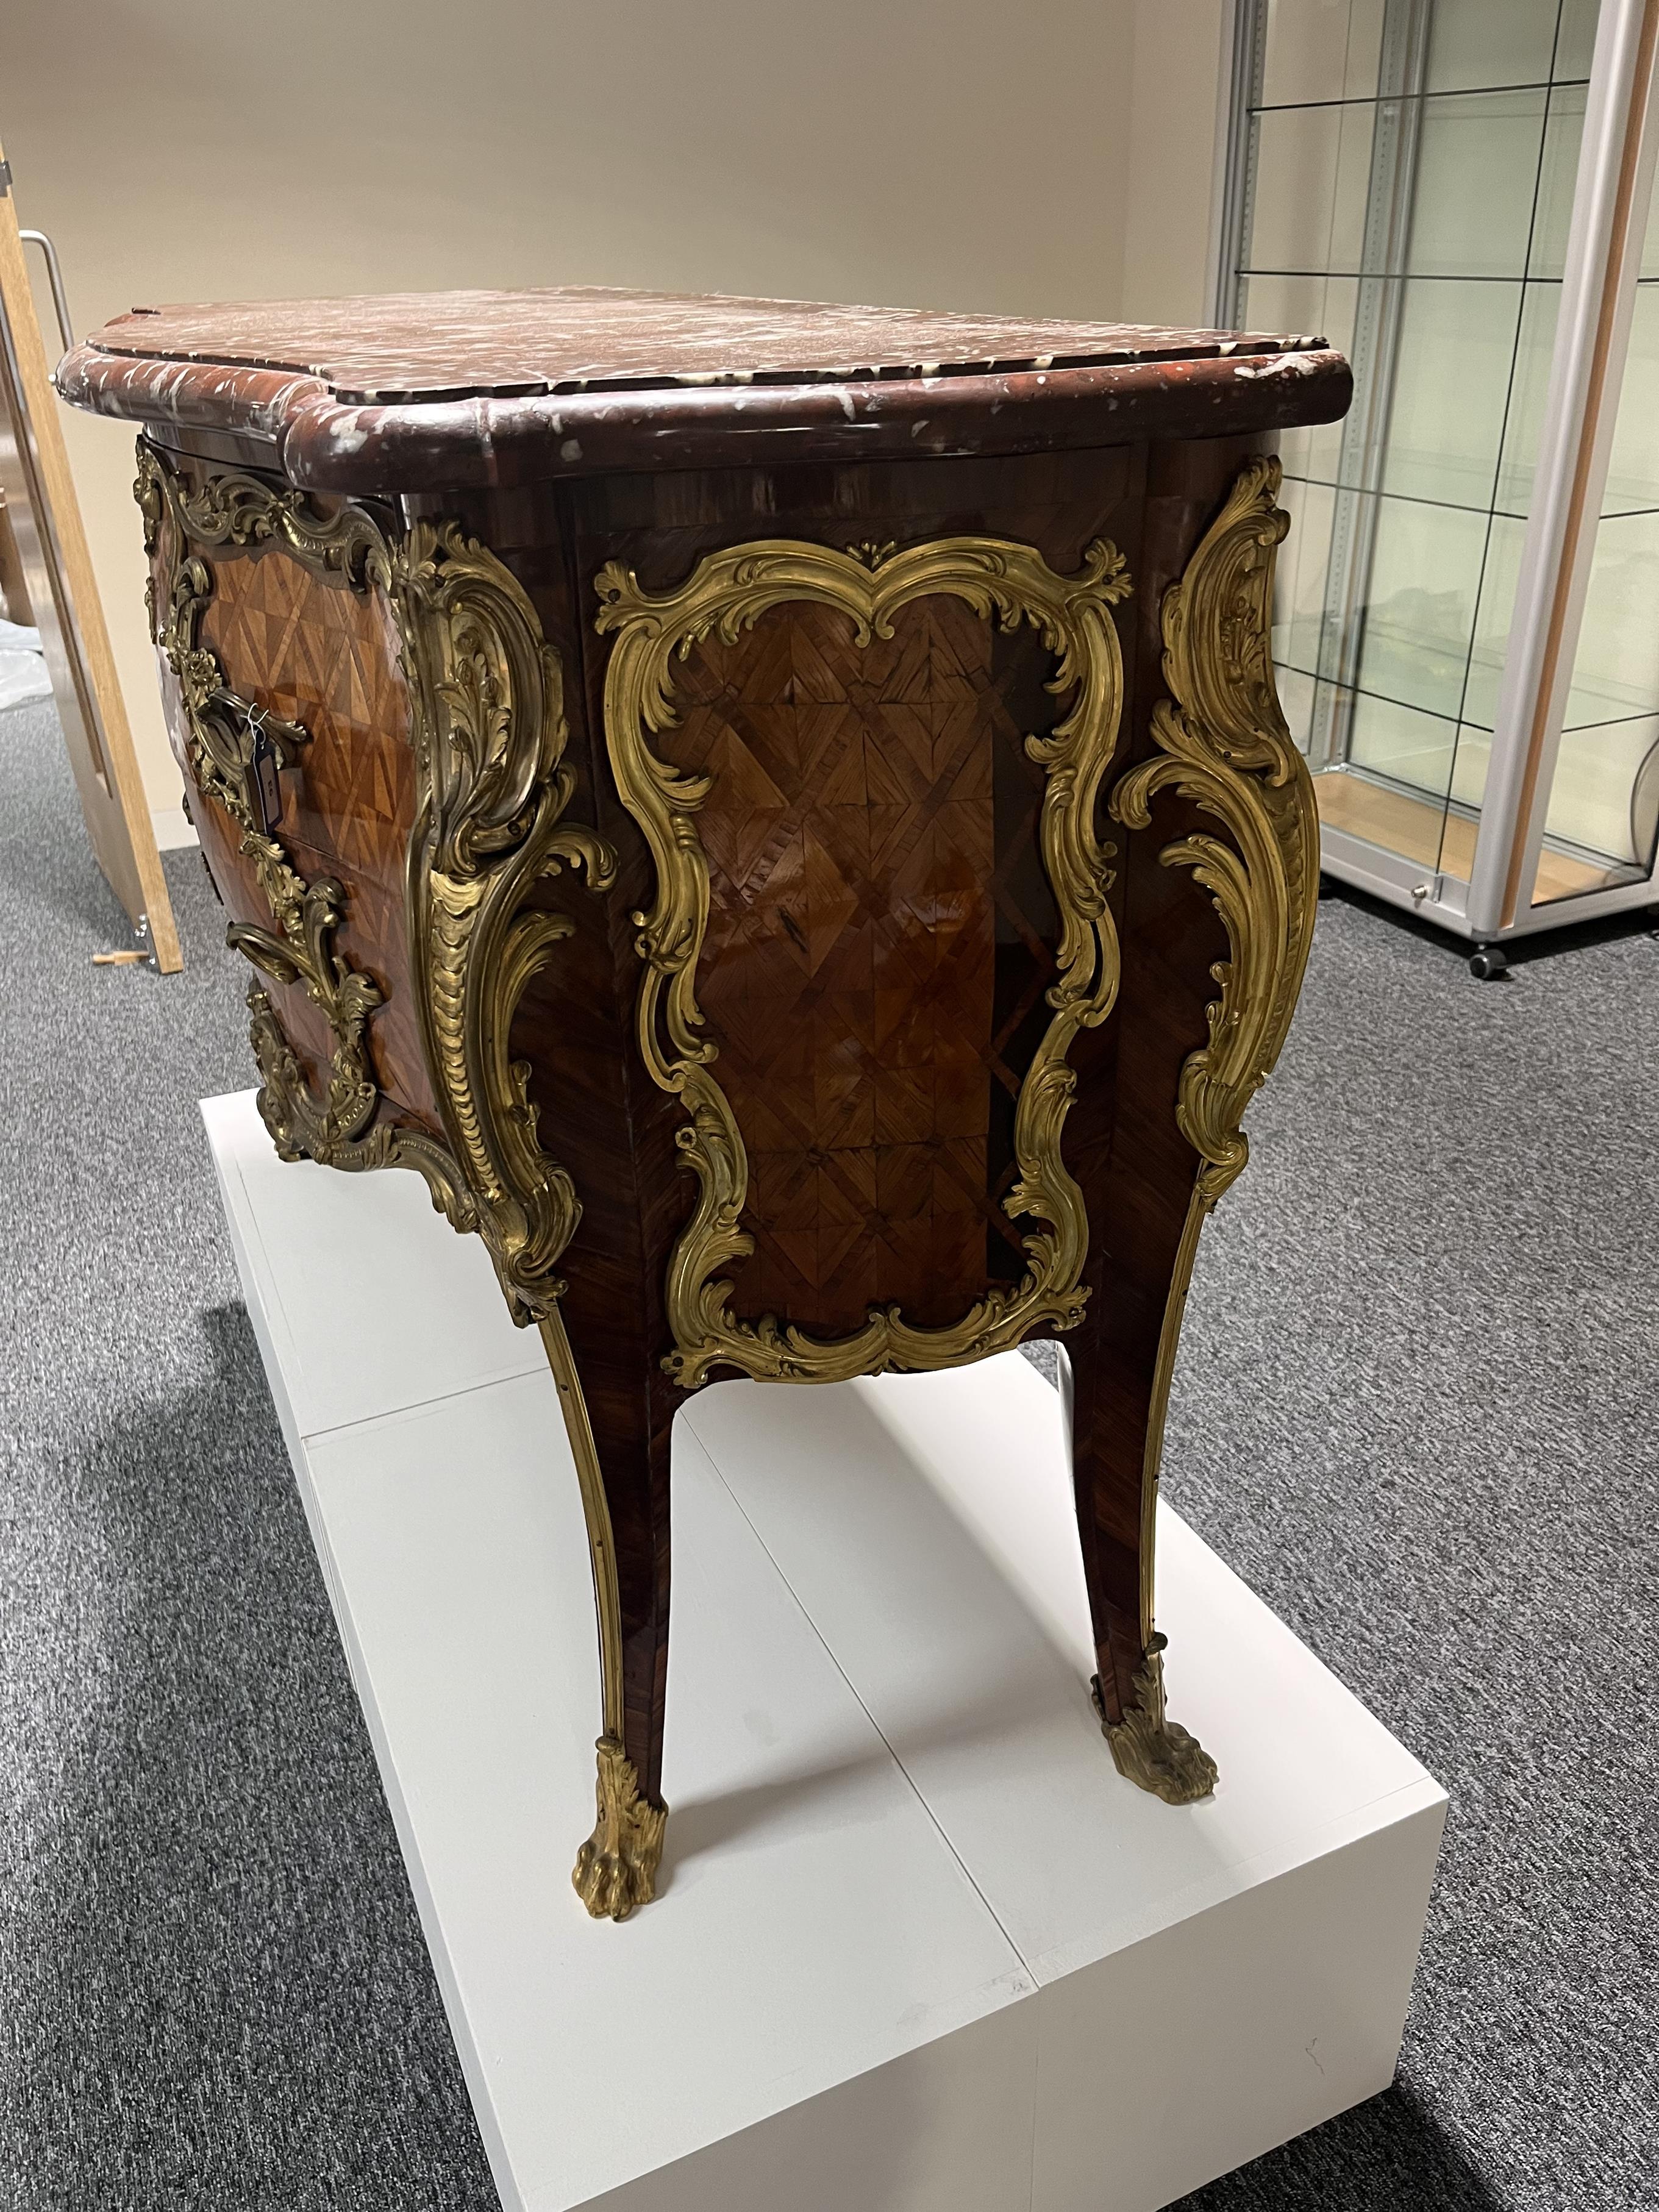 A FINE FRENCH LOUIS XV KINGWOOD AND ORMOLU MOUNTED SERPENTINE BOMBE COMMODE ATTRIBUTED TO GILLES - Image 7 of 36